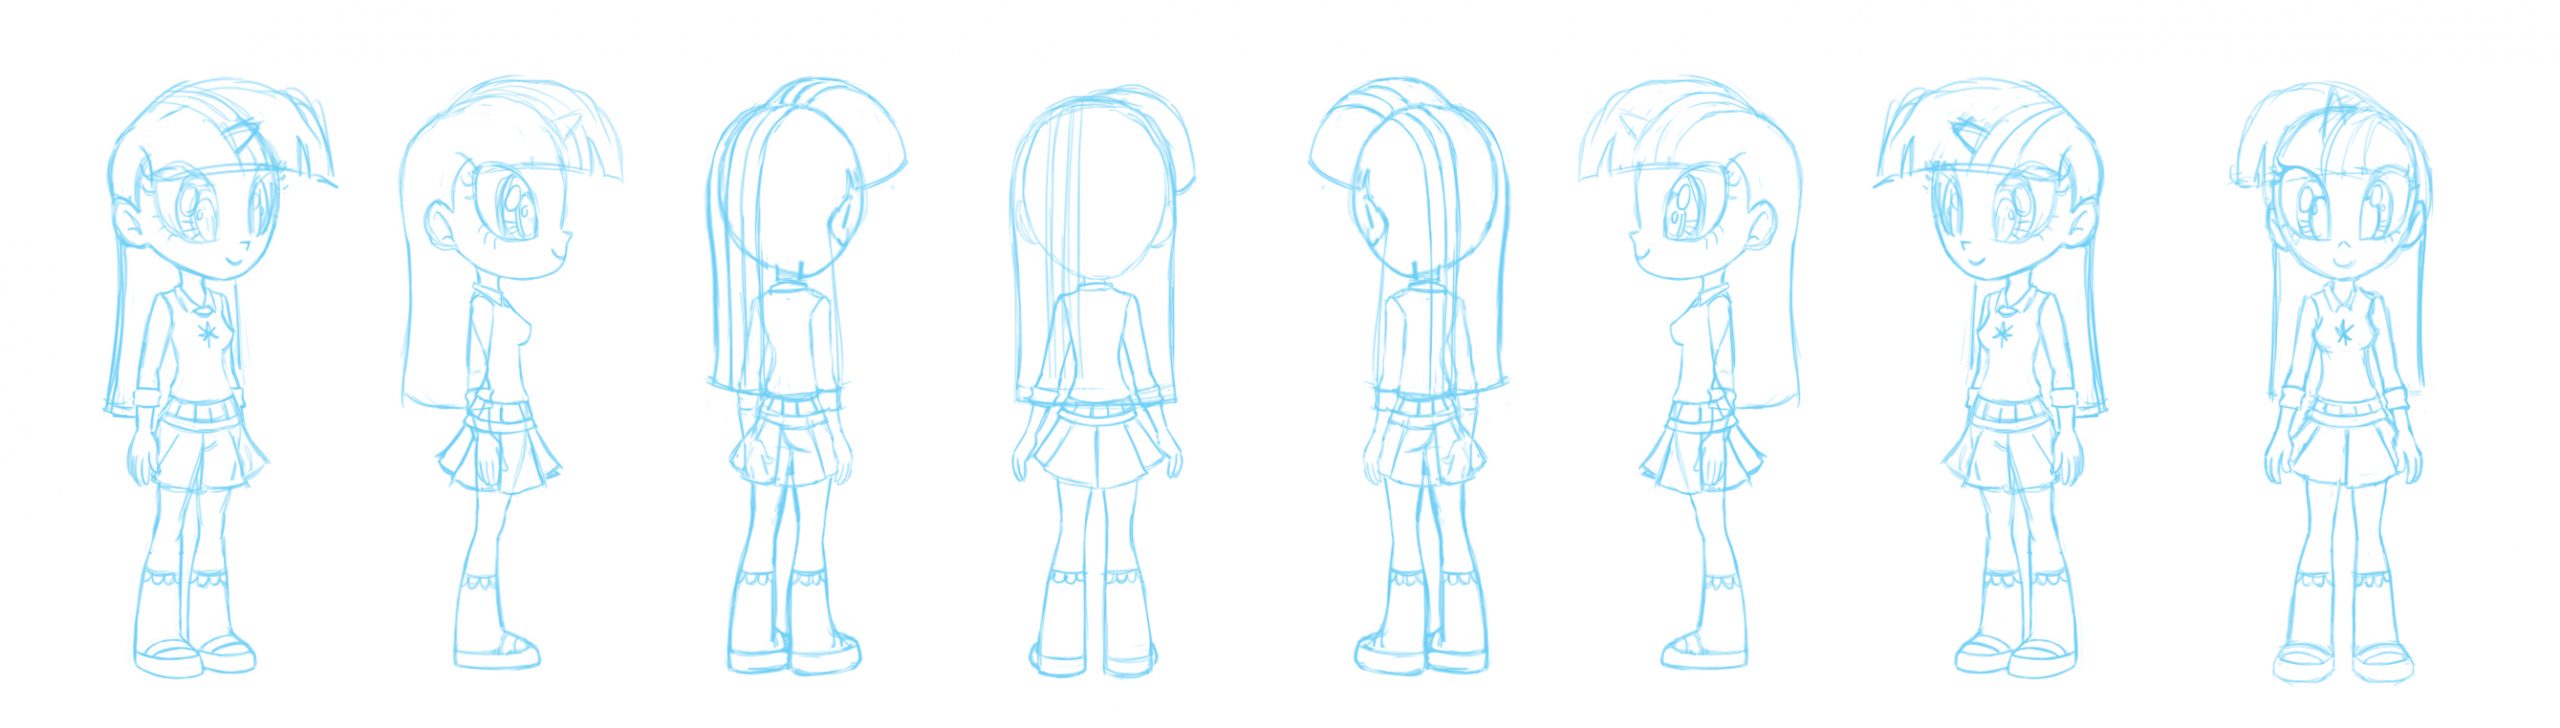 MLH Profile Sketches